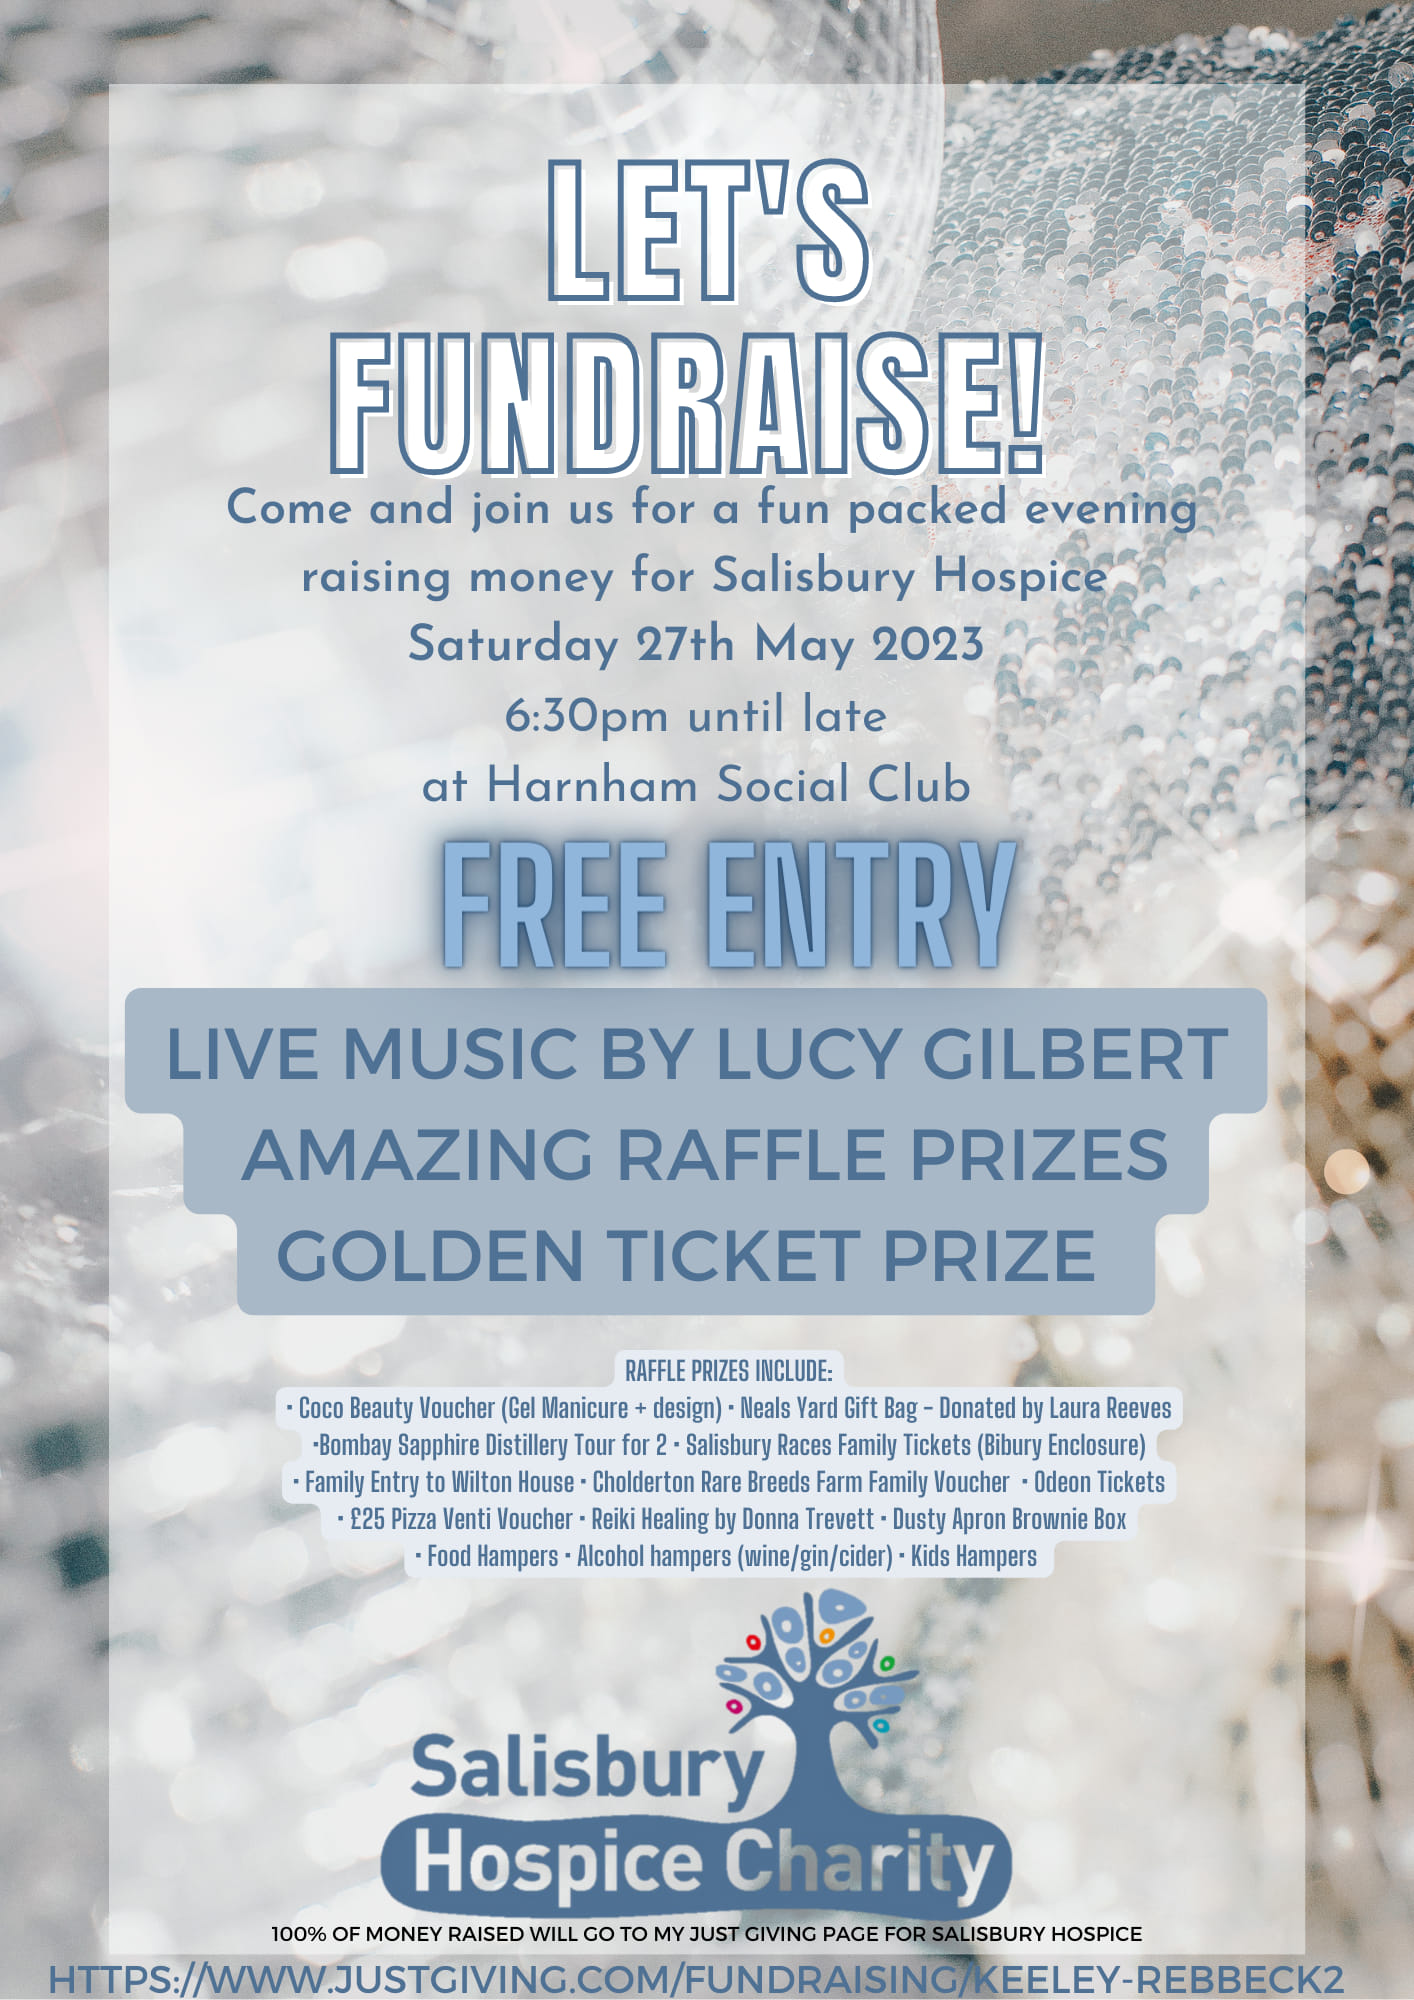 Hospice Fundraiser - live music by LUCY GILBERT